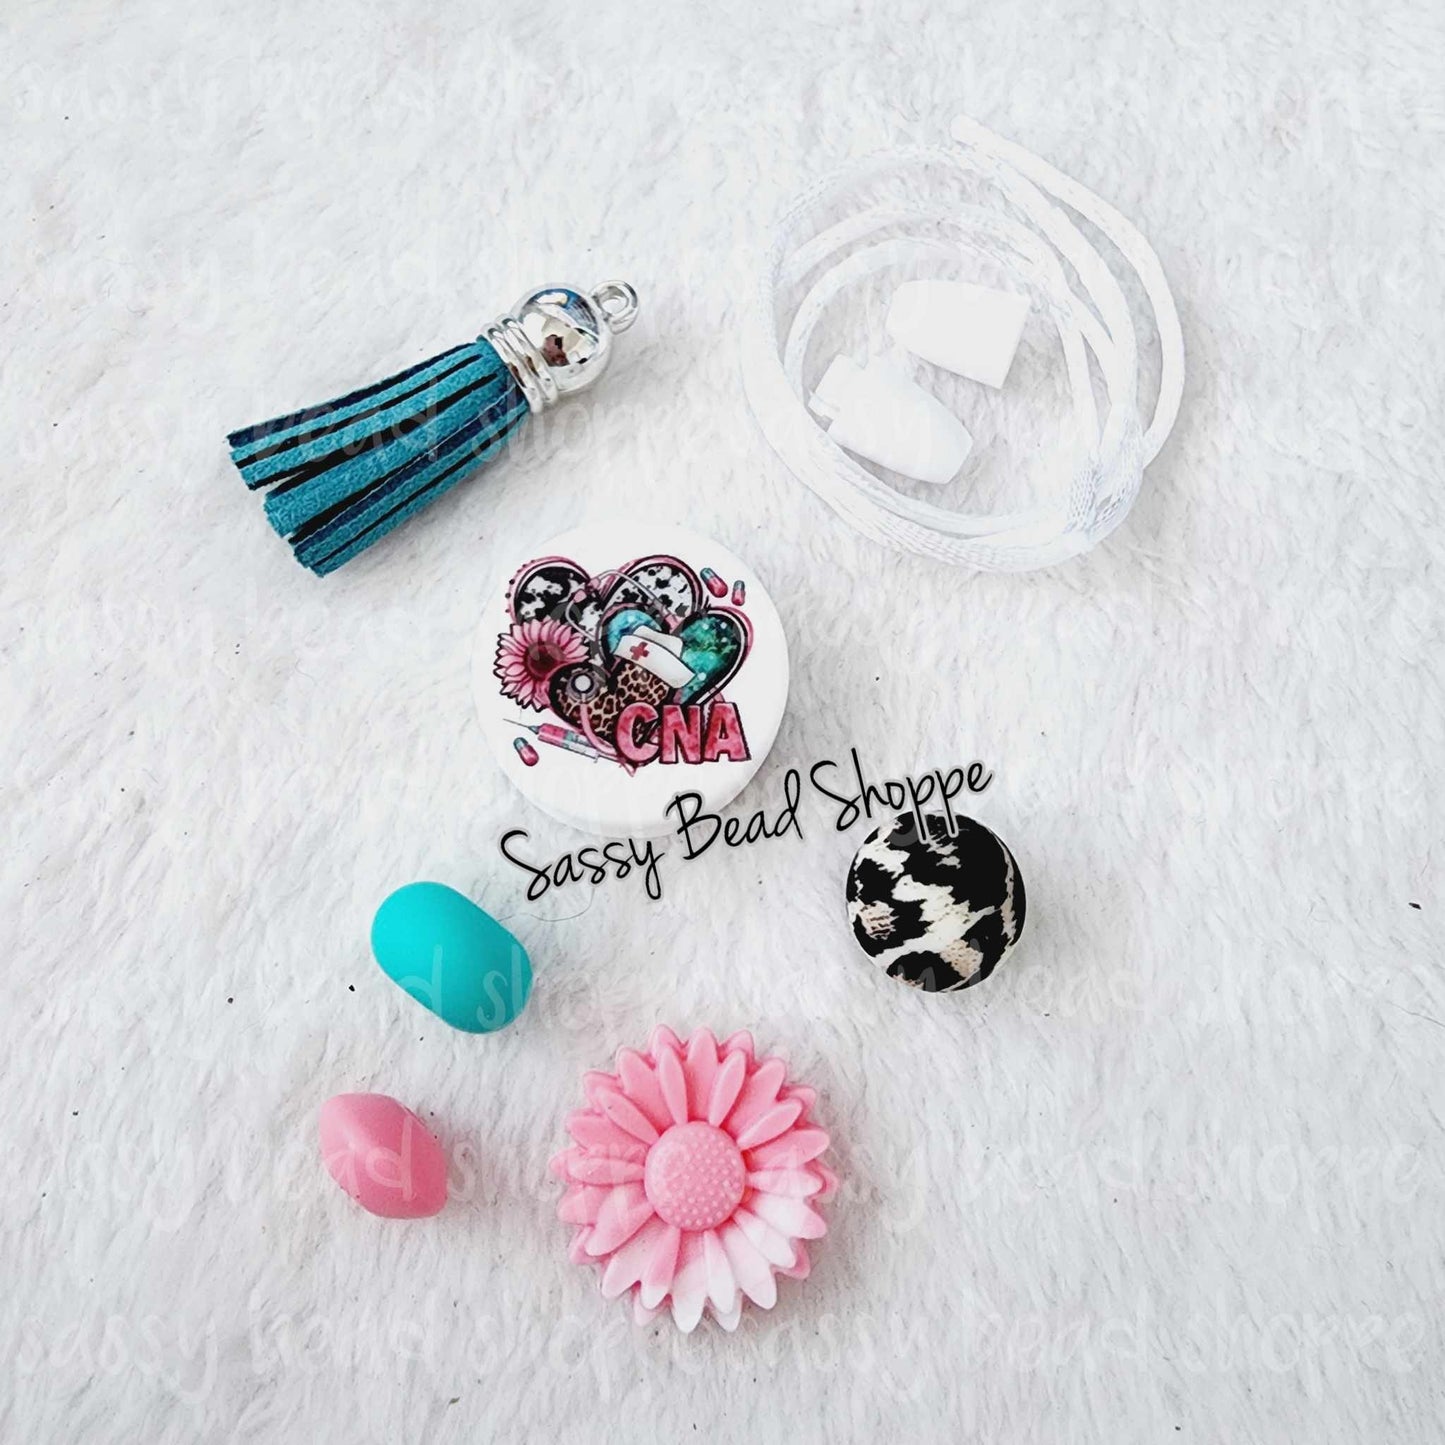 Sassy Bead Shoppe Floral CNA Car Charm What you will receive in your kit